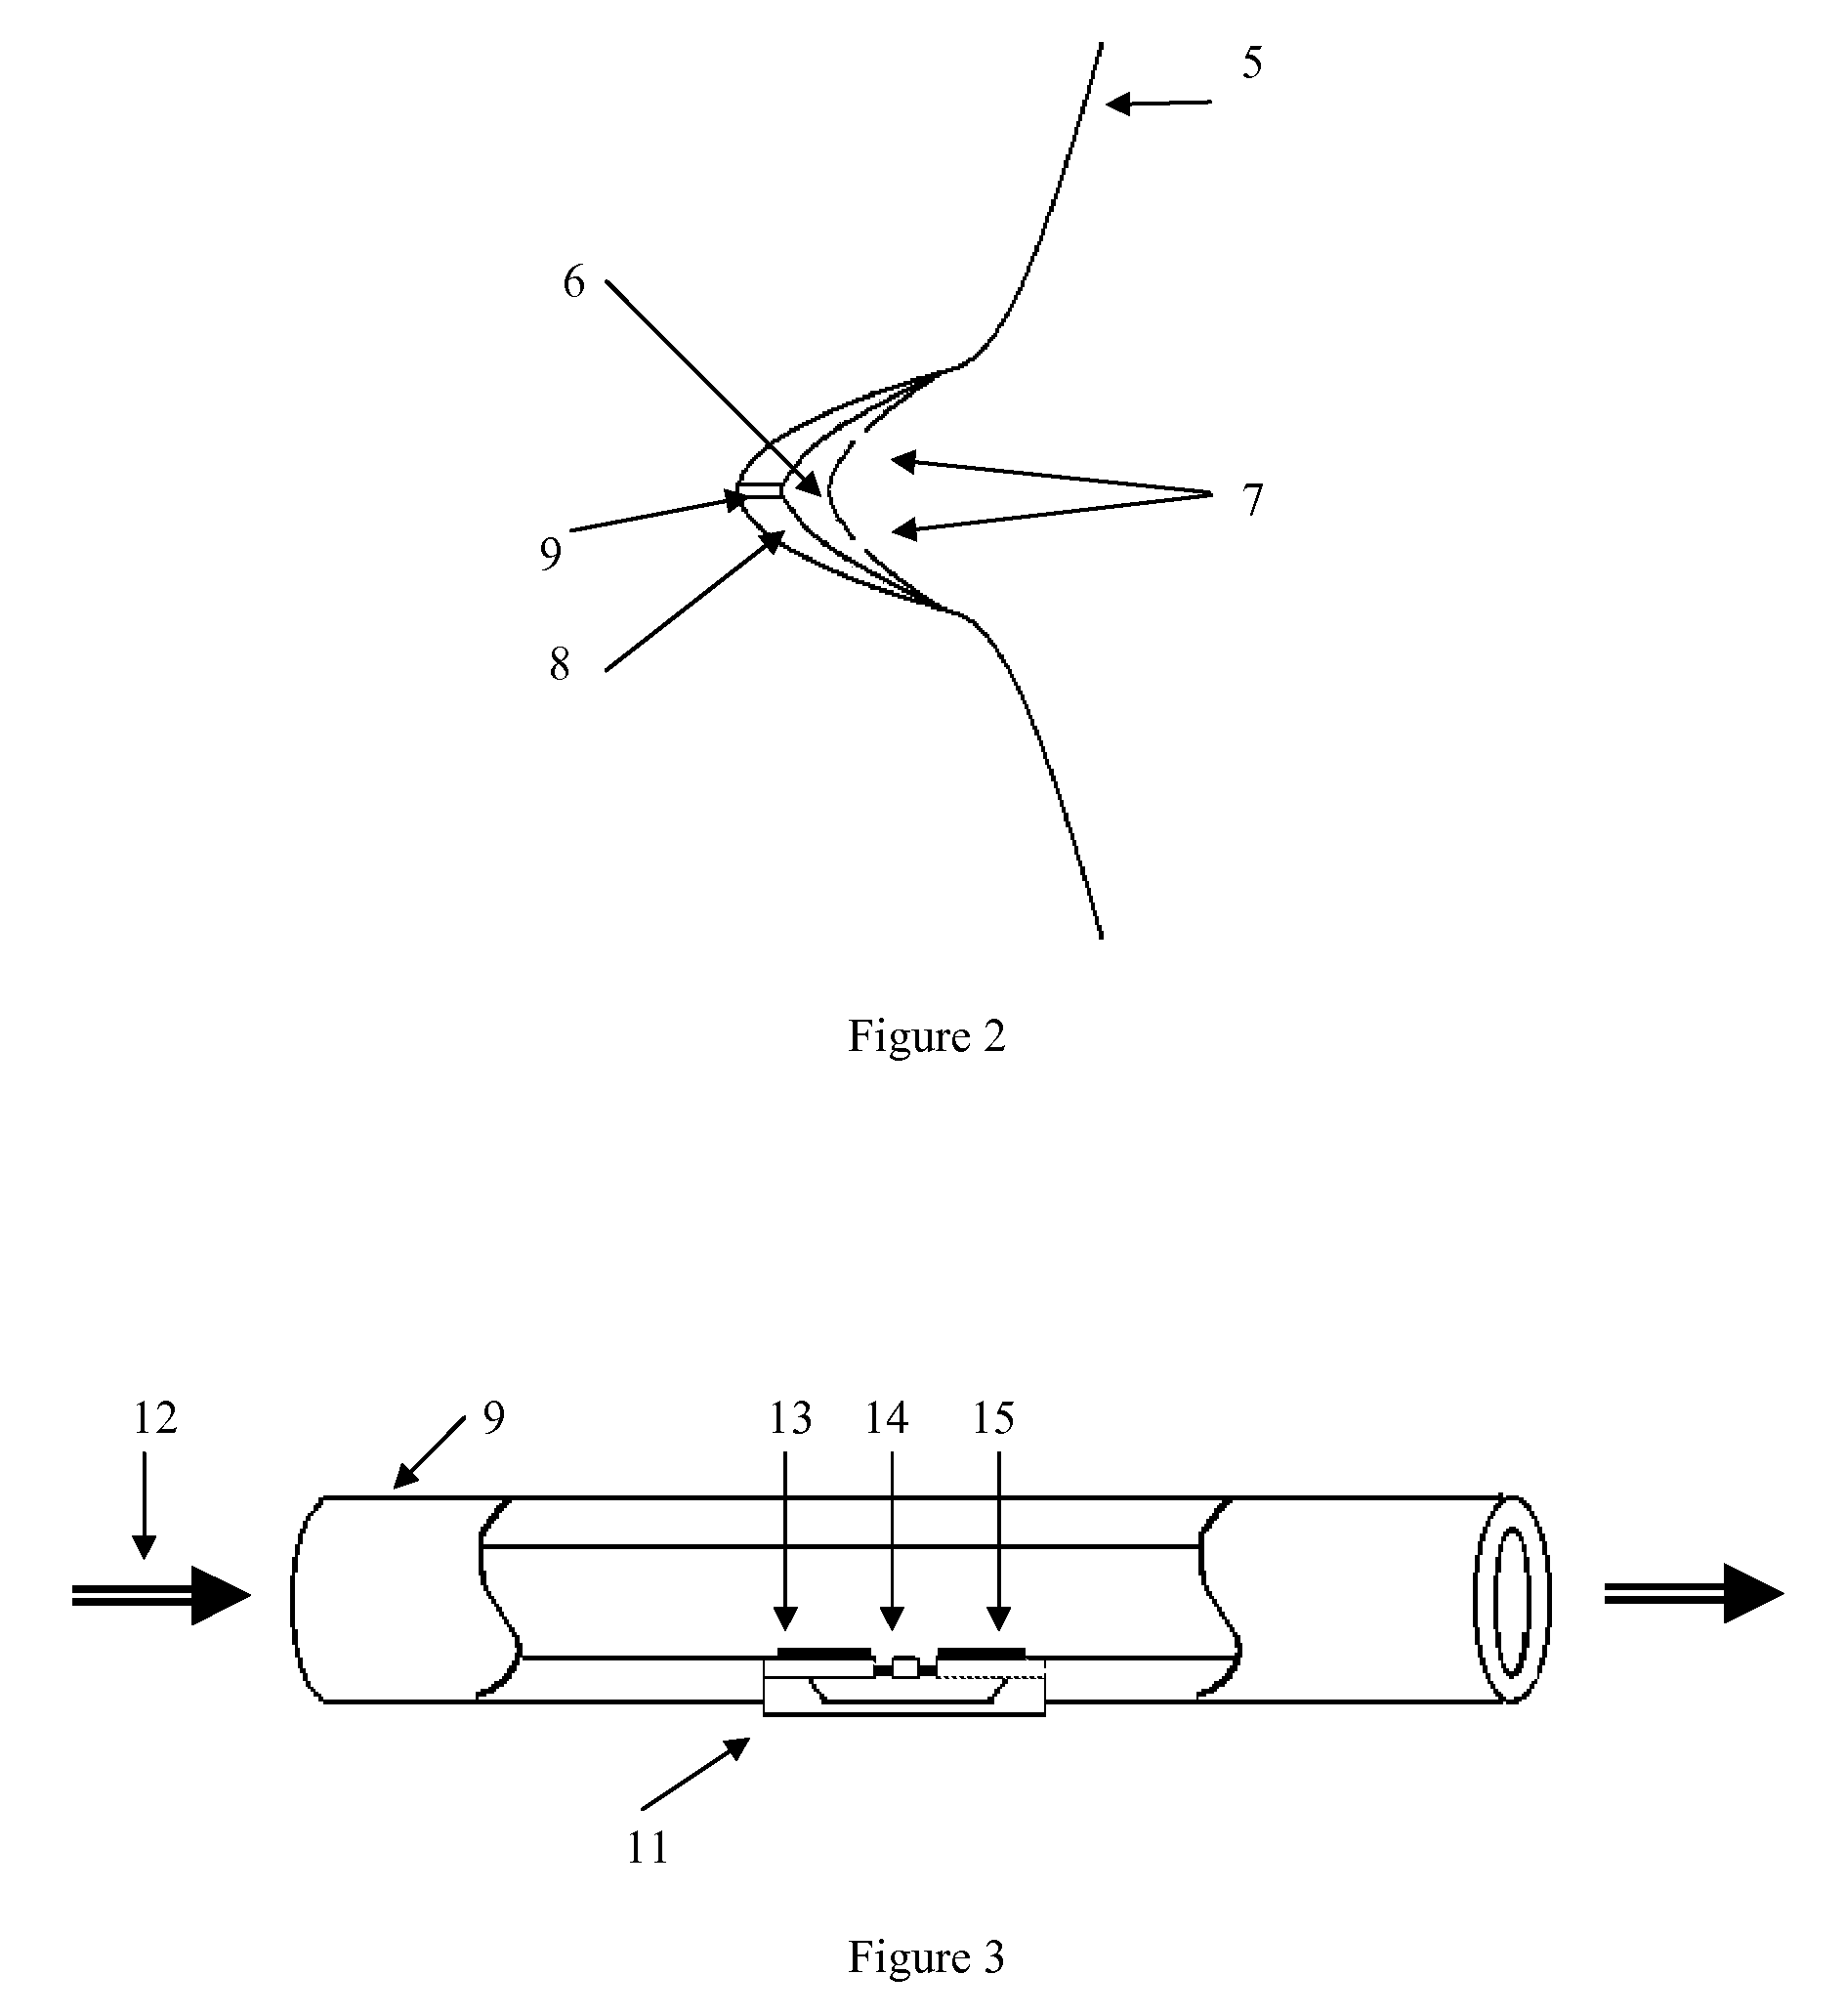 Apparatus For Determining the Amount of Milk Breast-Fed to a Baby by Convective Heat Transfer